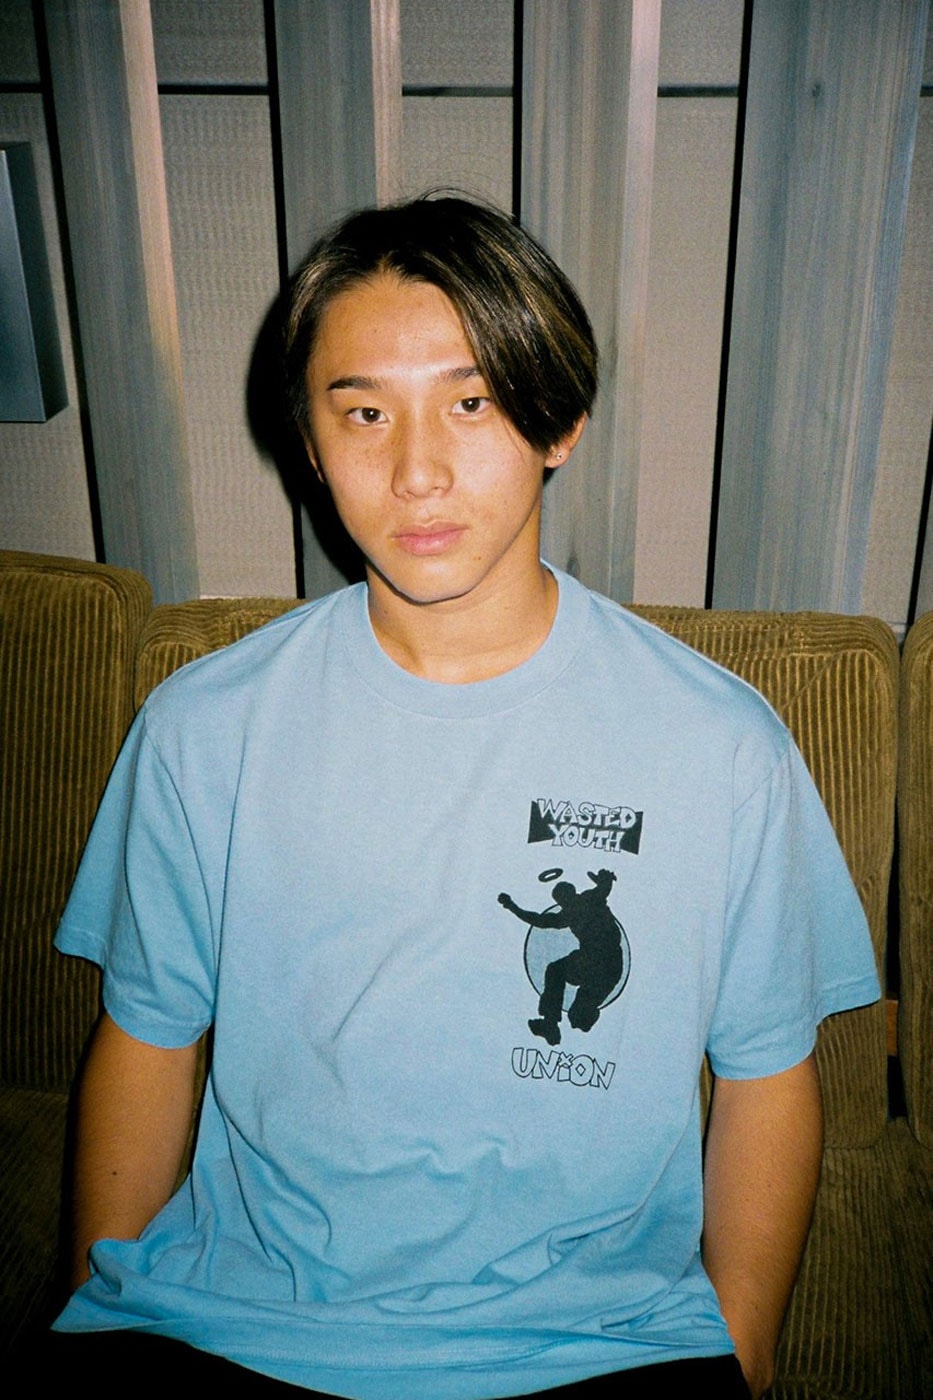 Union Wasted Youth VERDY celebrate second store in Japan Osaka store exclusive frontman 30th anniversary issei ren taro release info date price october 8